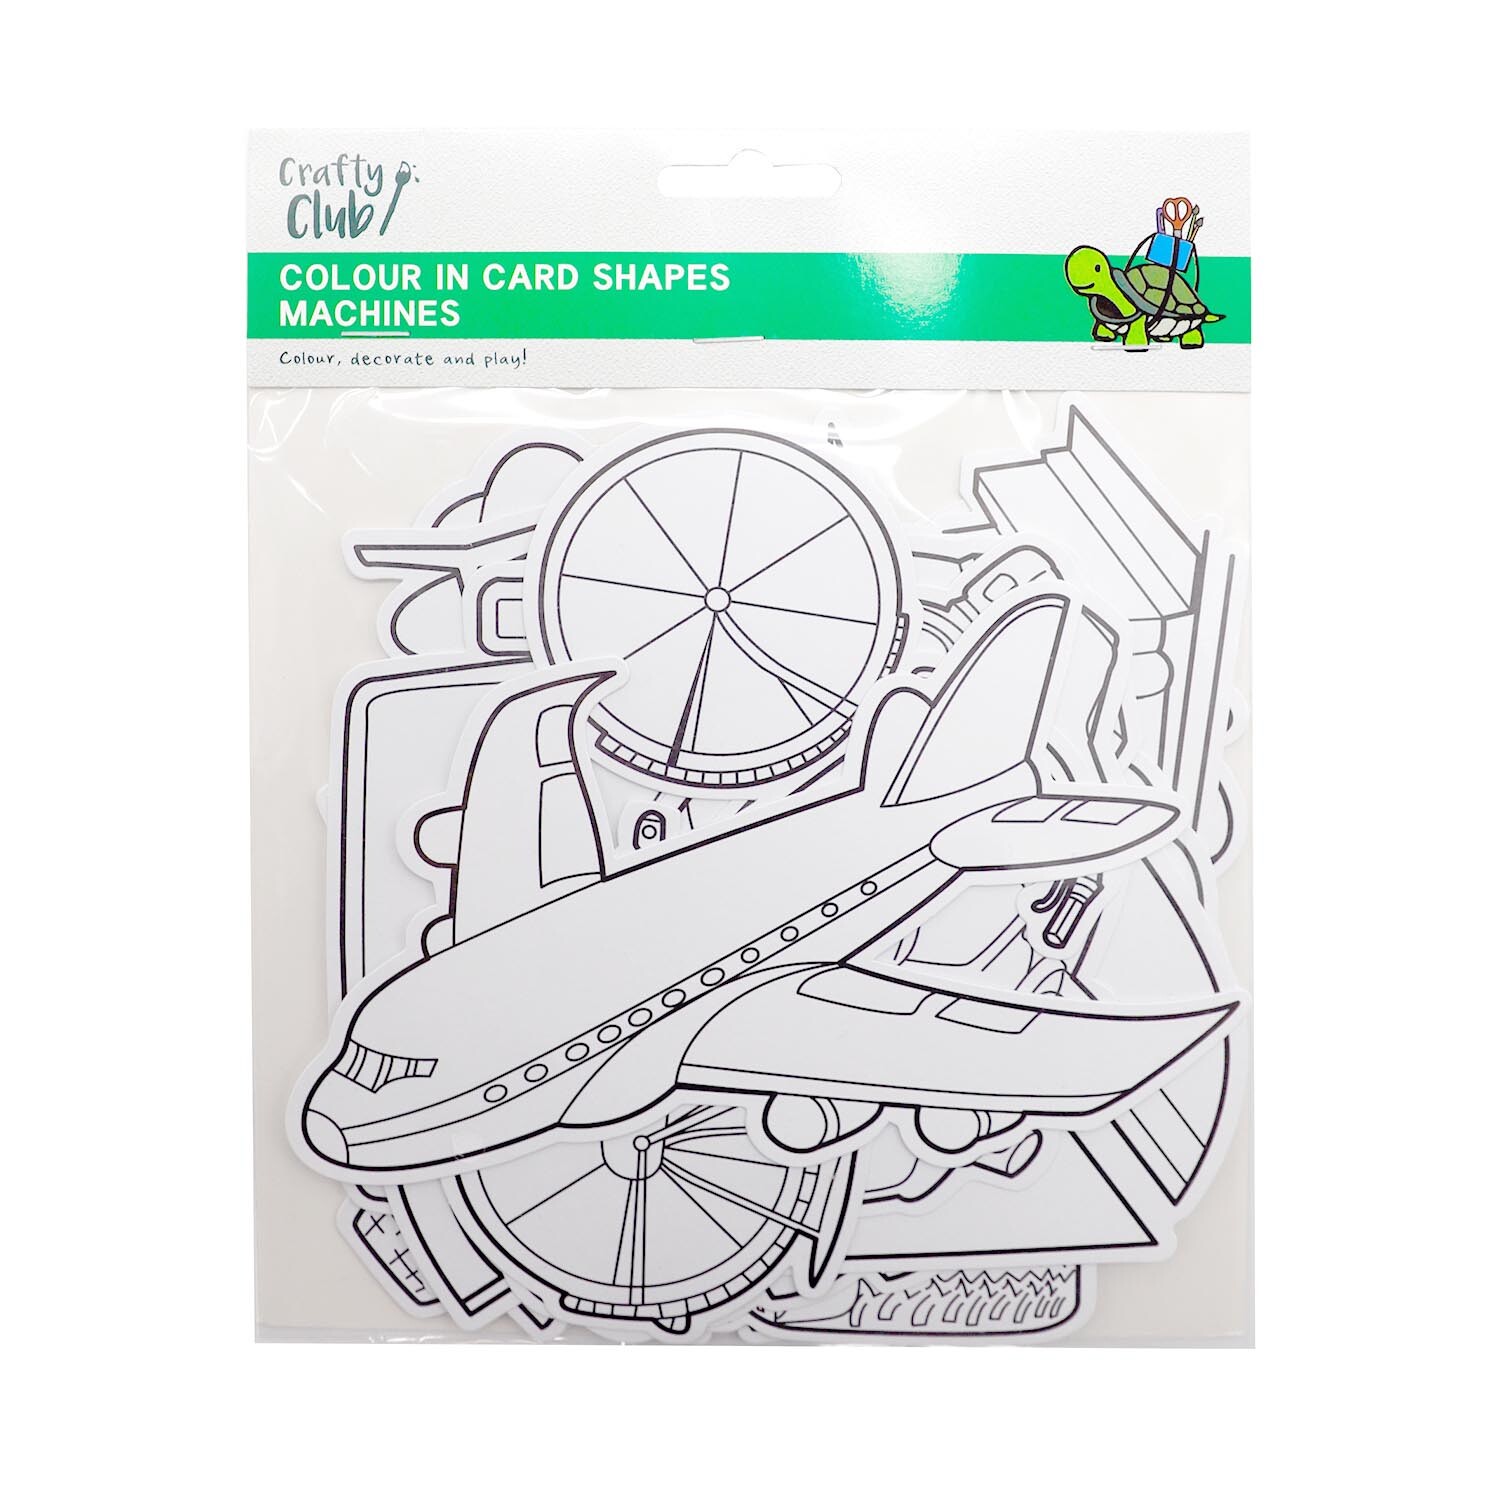 Pack of 12 Colour In Card Shapes - Machines Image